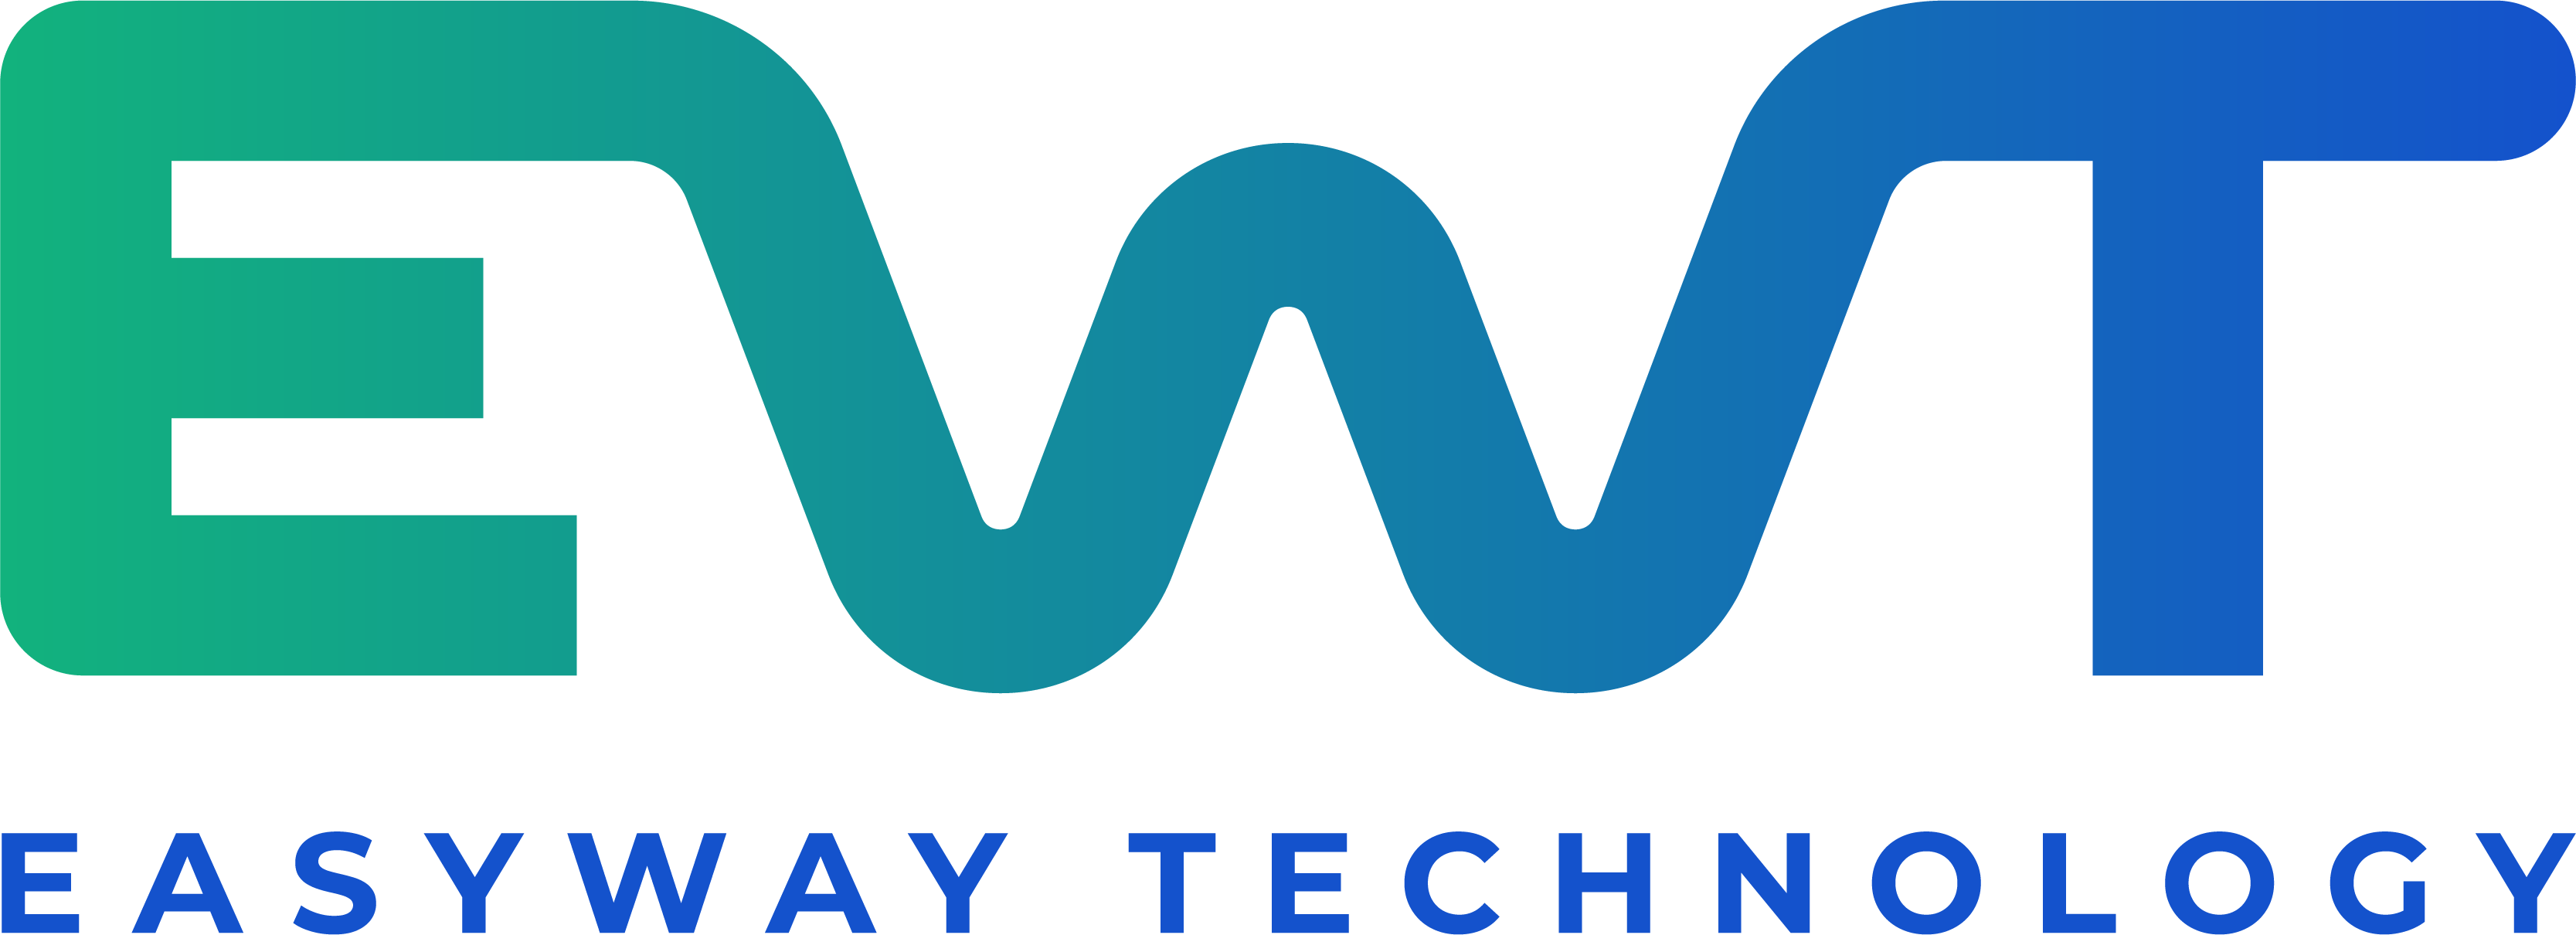 Easyway Technology